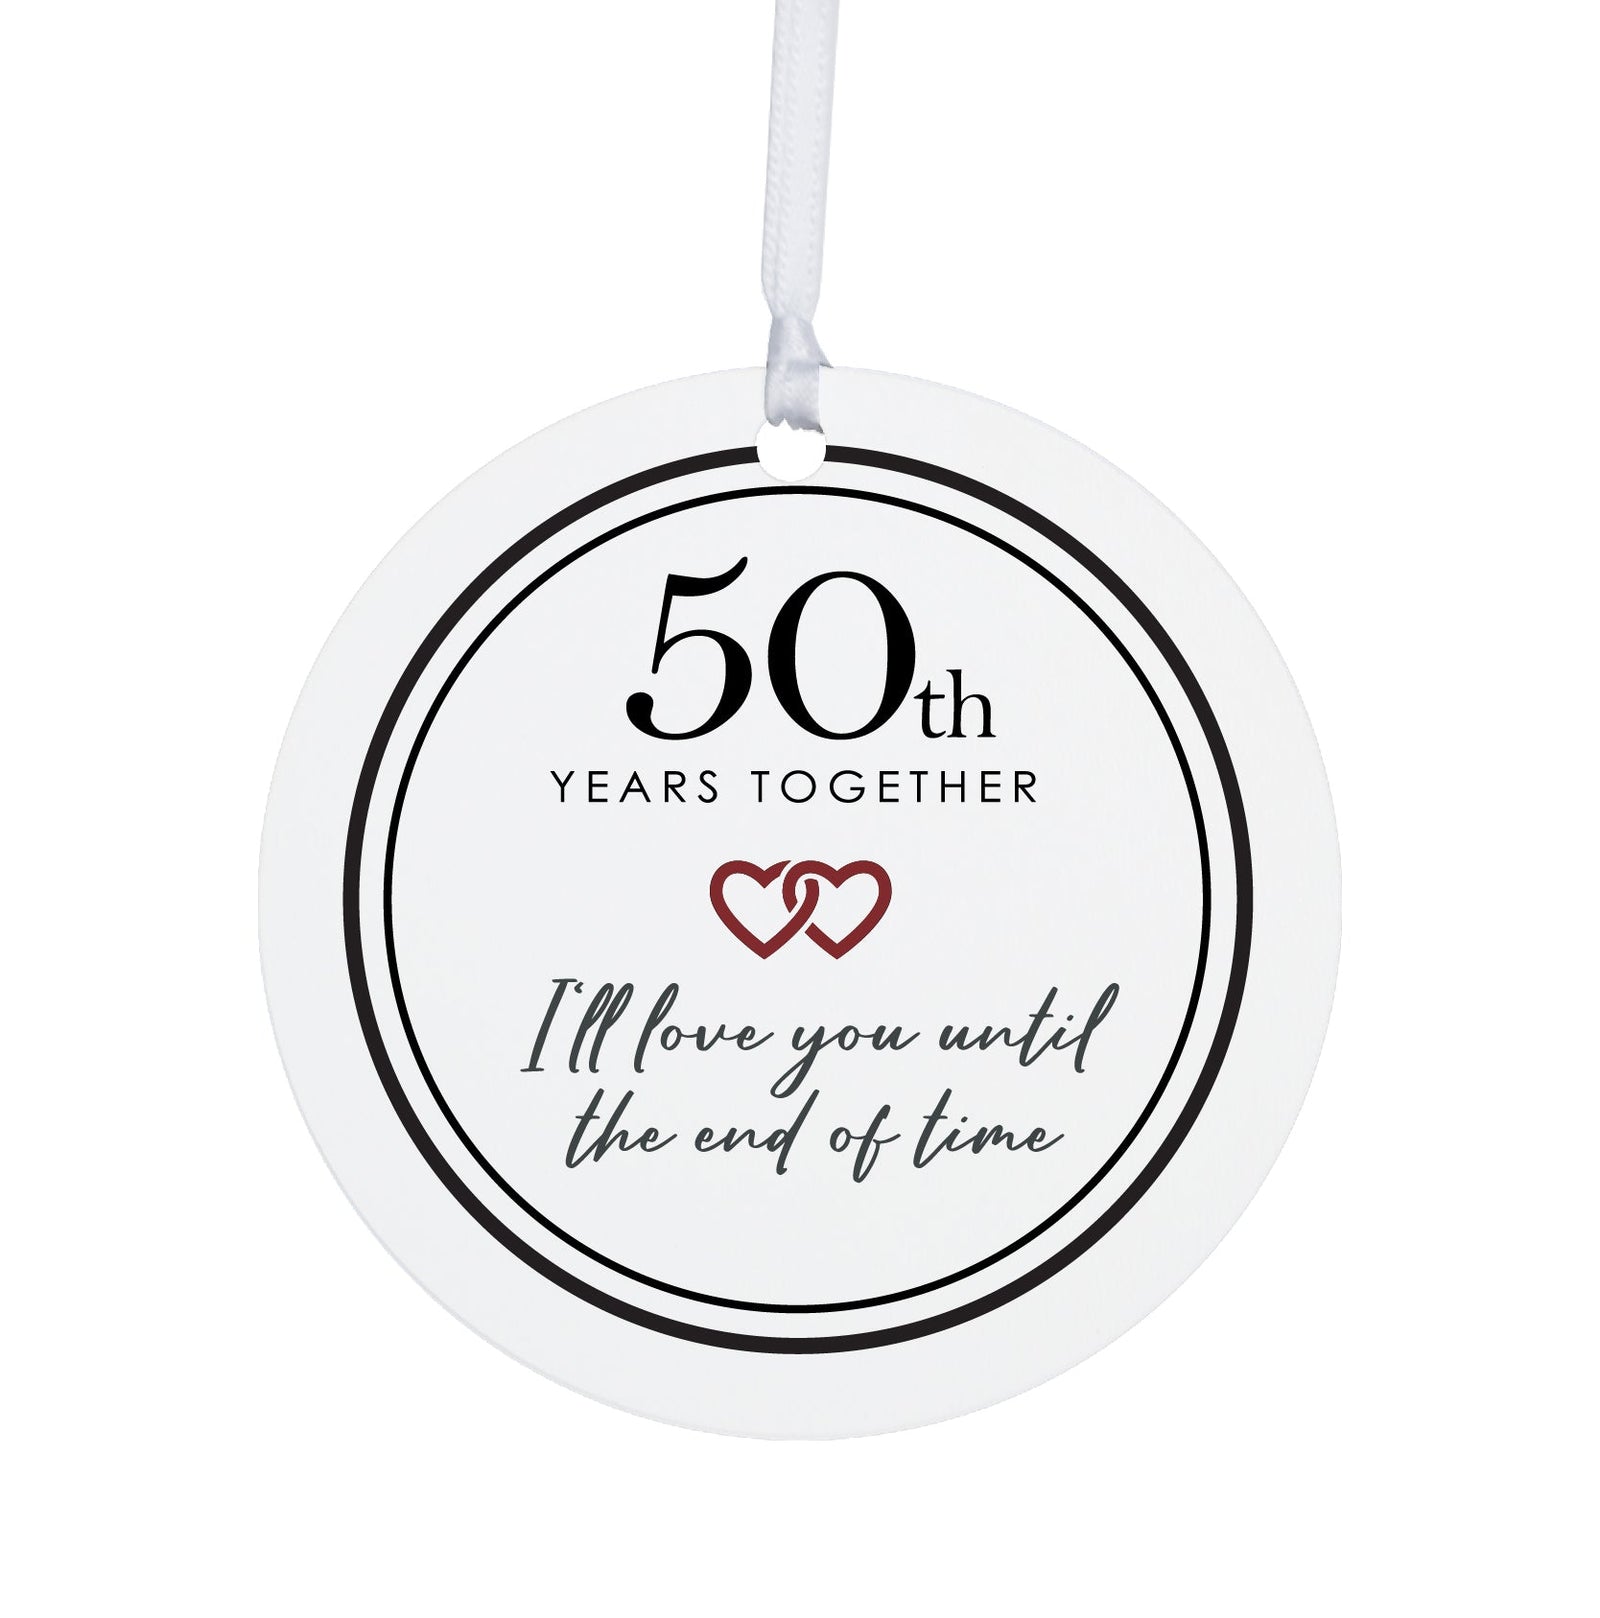 50th-Year Together Wedding Anniversary White Ornament With Inspirational Message Gift Ideas - I Love You Till The End Of Time